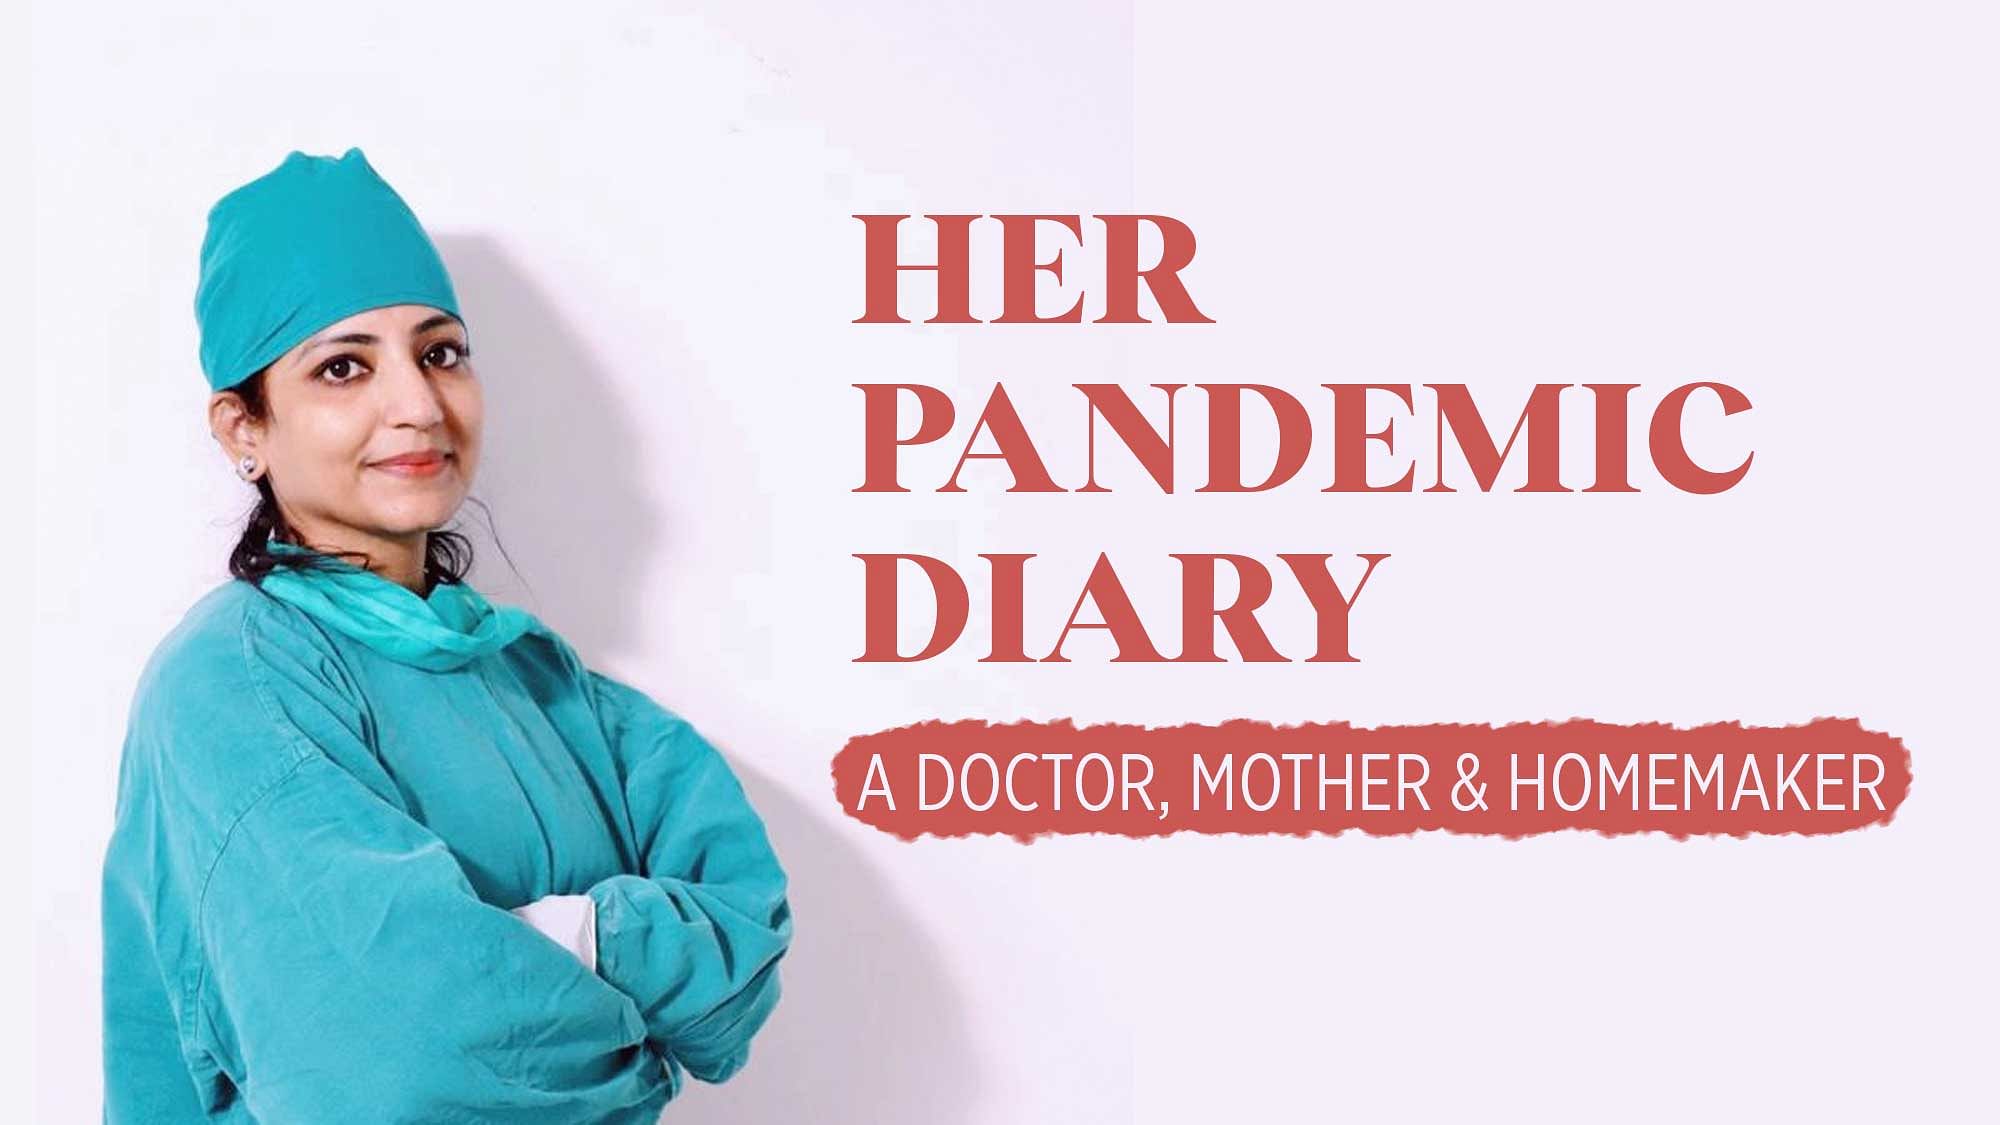 Dr Shehla Jamal has been, single-handedly, looking after her kids and home, and managing work during the pandemic.